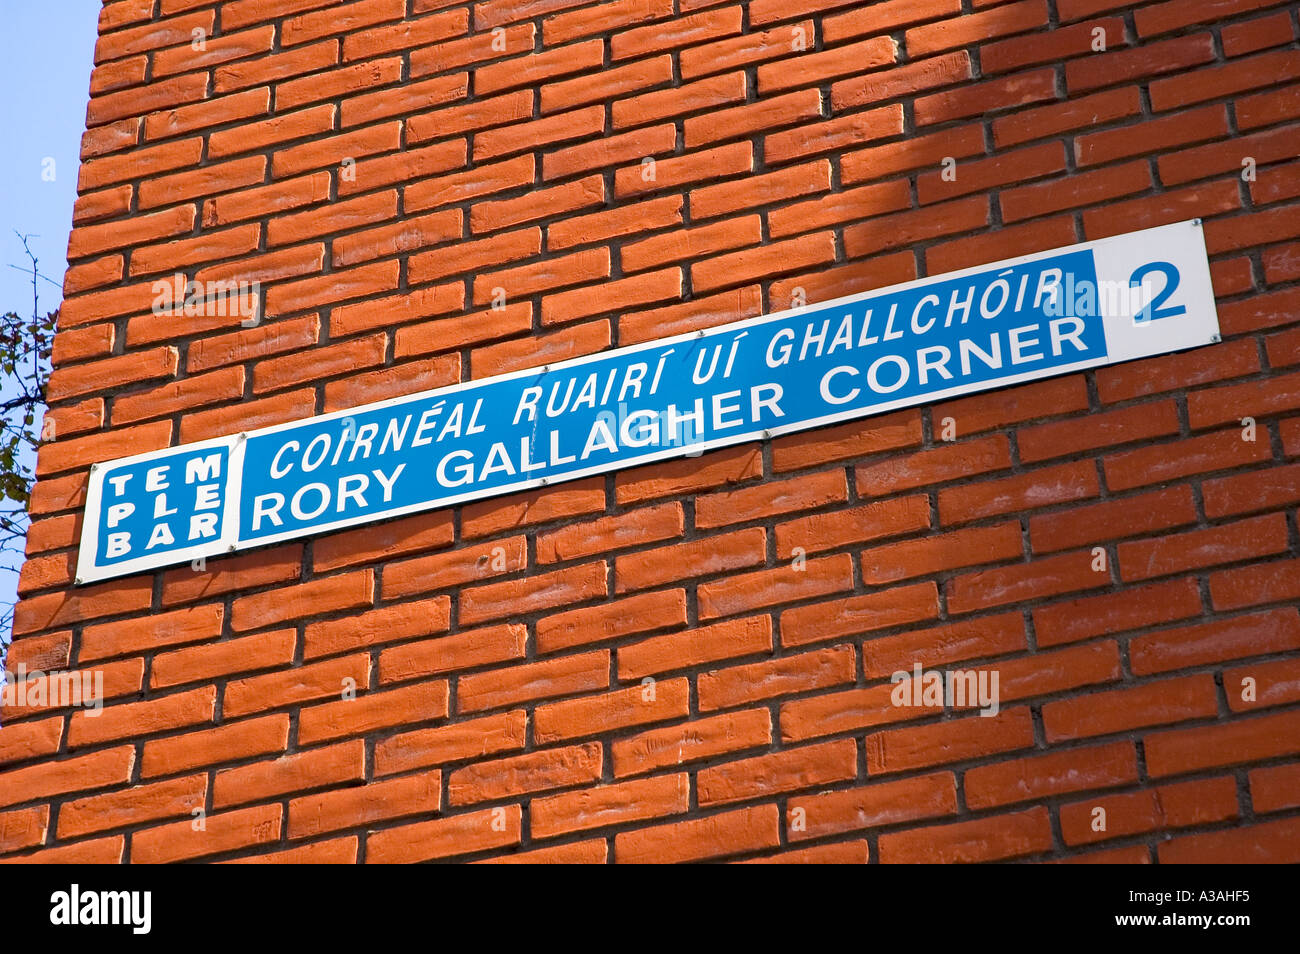 Sign for Rory Gallagher Corner, Temple Bar, Dublin Ireland Stock Photo